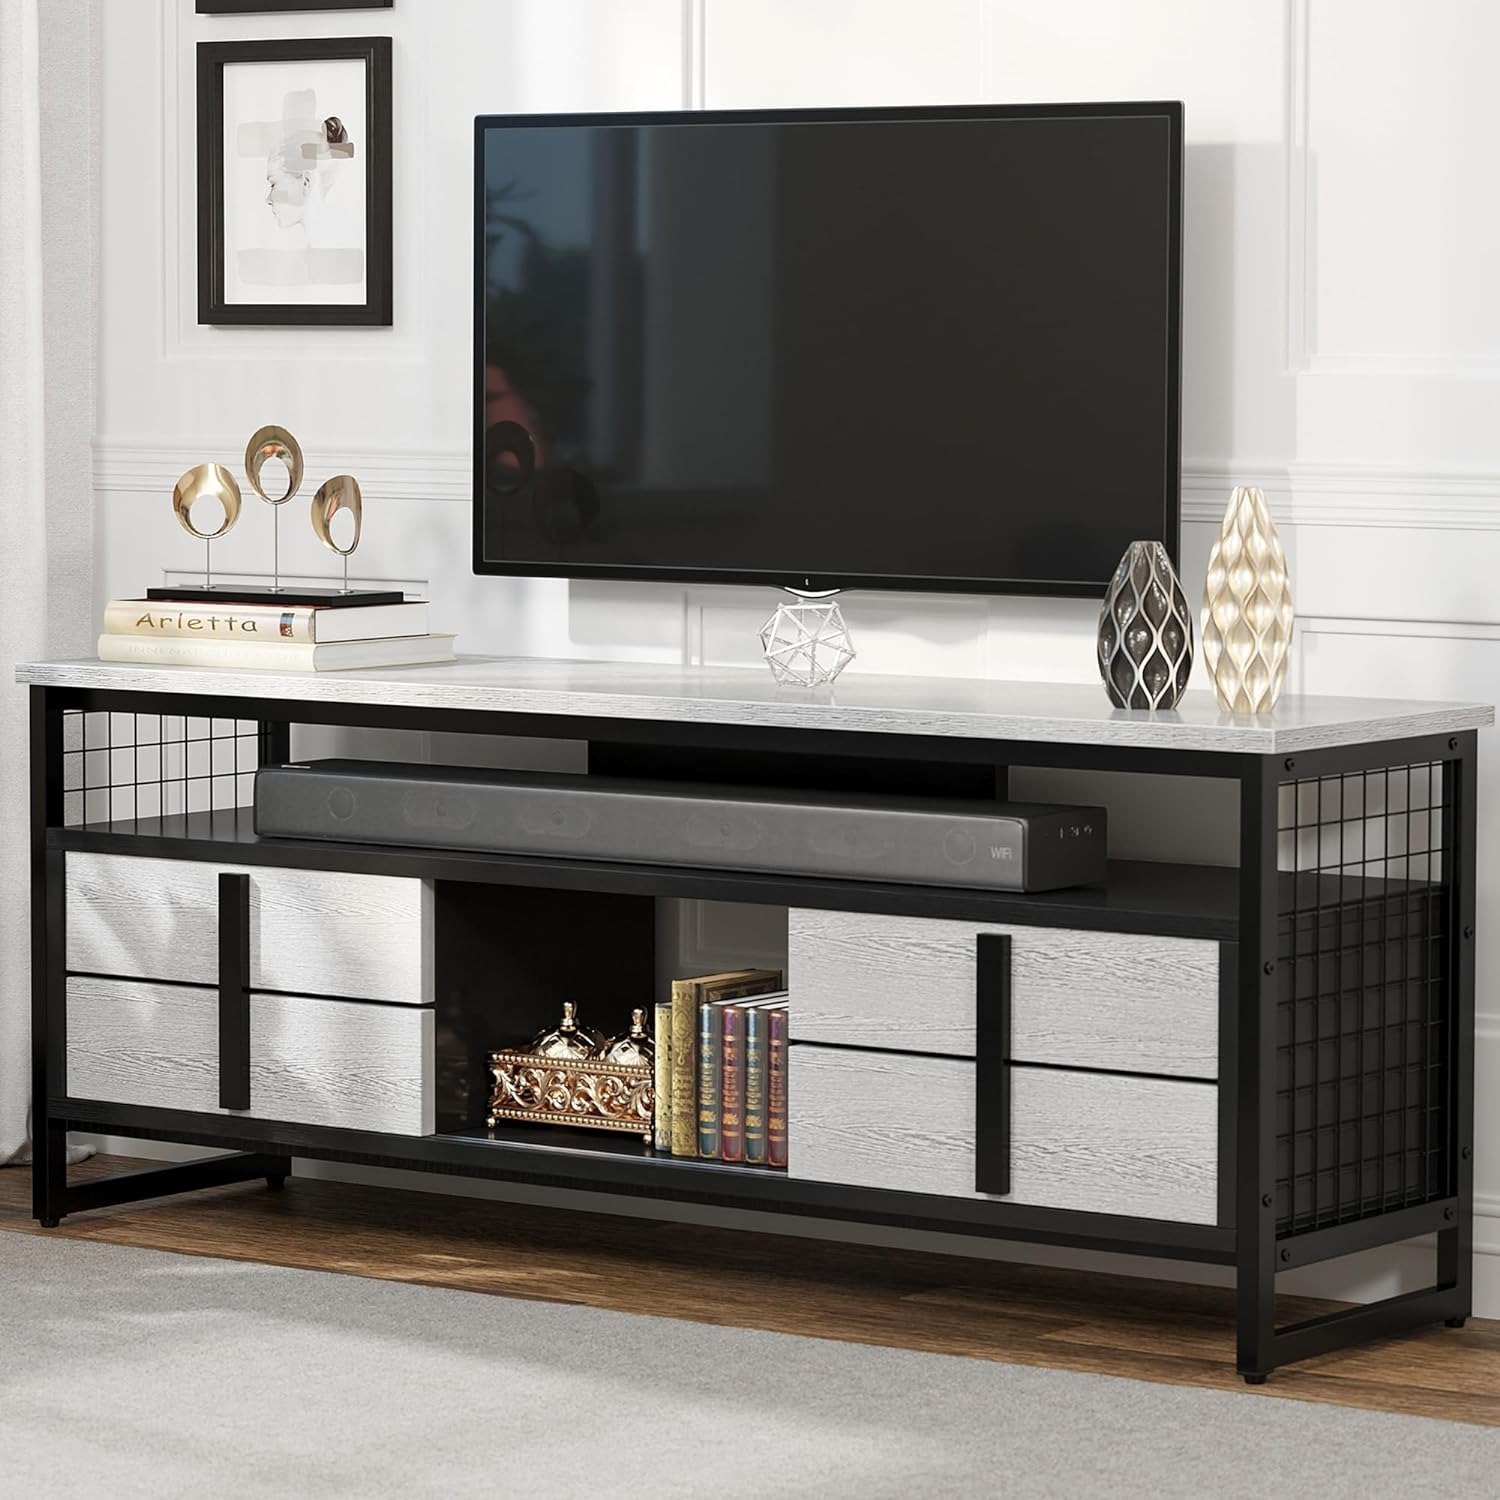 YITAHOME Wood 65" TV Entertainment Center (White) $100 + Free Shipping